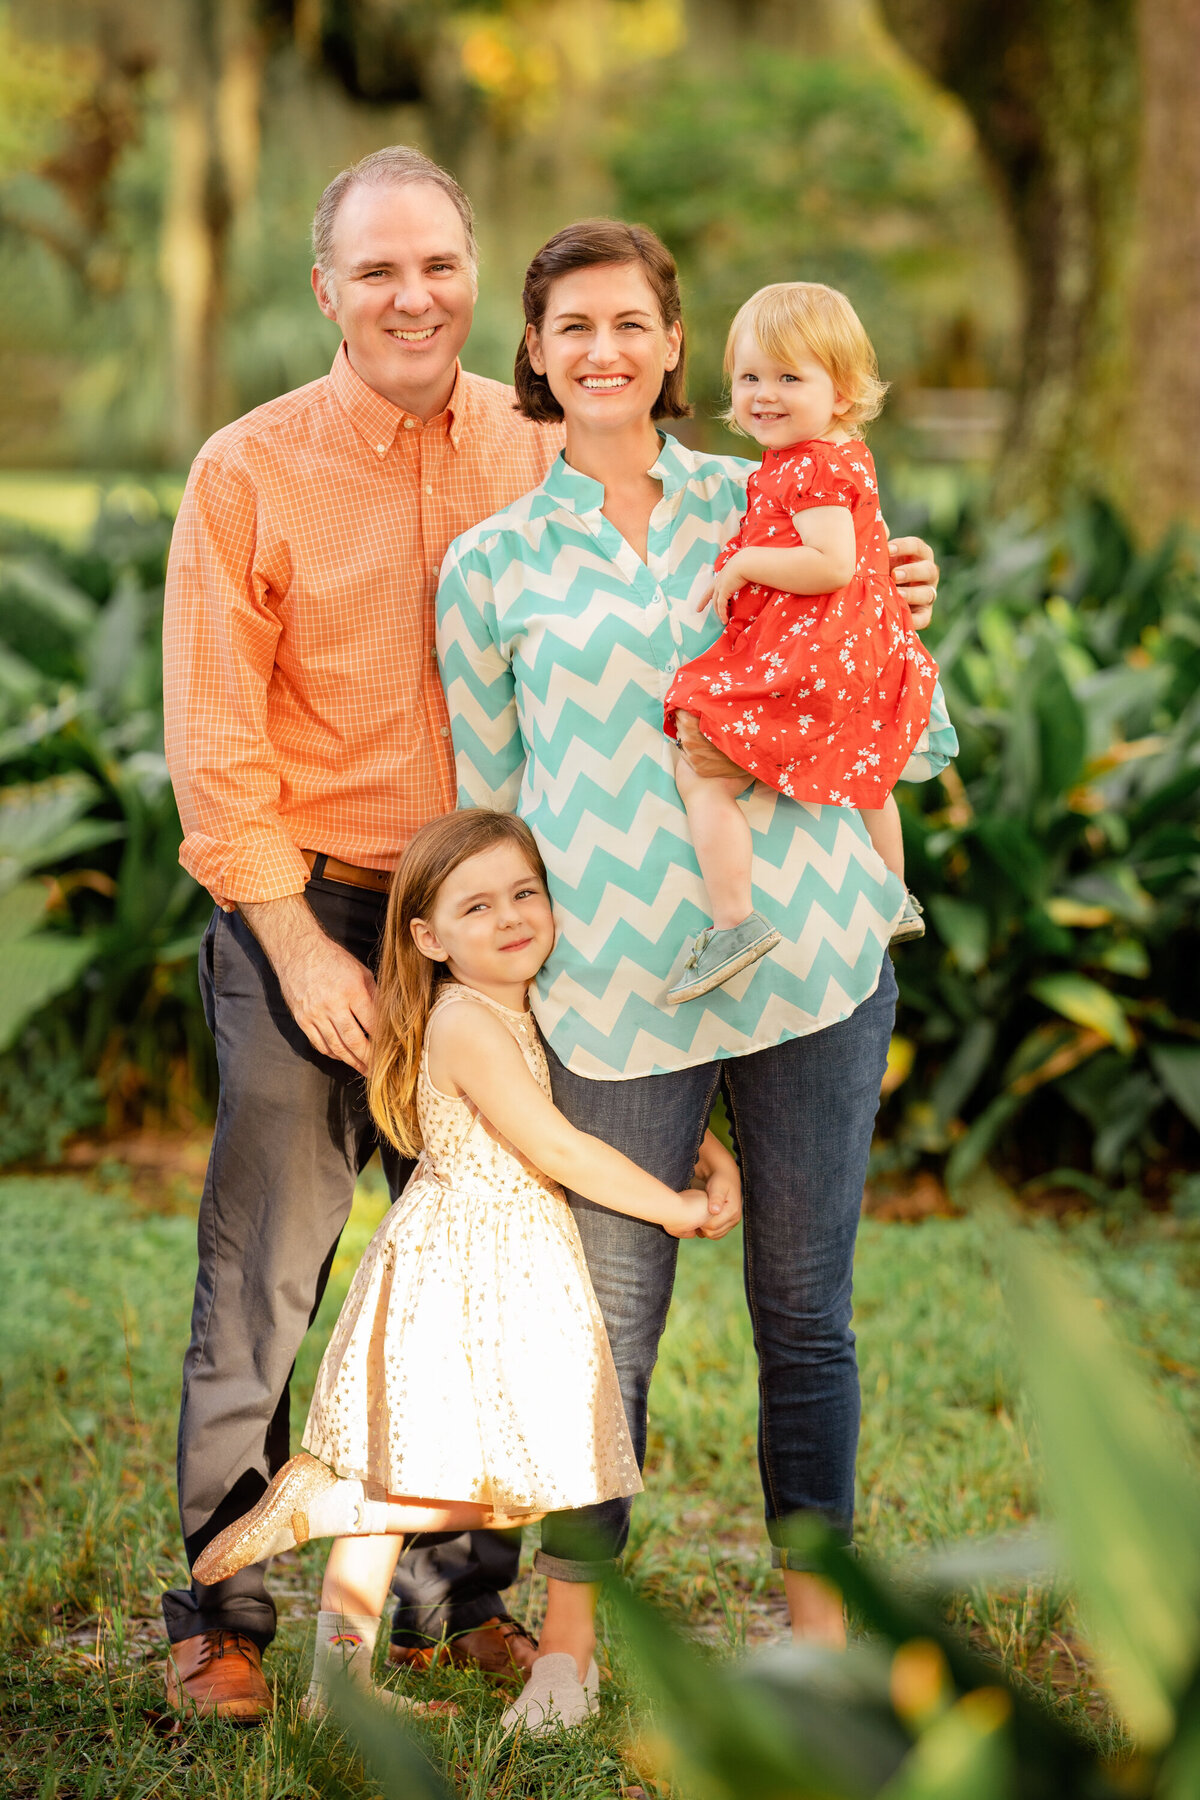 Family standing near the cast iron plants in City Park.  Dad is older, wearing an orange shirt.  Mom has short brown hair and is wearing an aqua and white chevron shirt.  The youngest daughter is wearing a red dress and is being held by mom.  The older daughter has her arms wrapped around mom's leg.